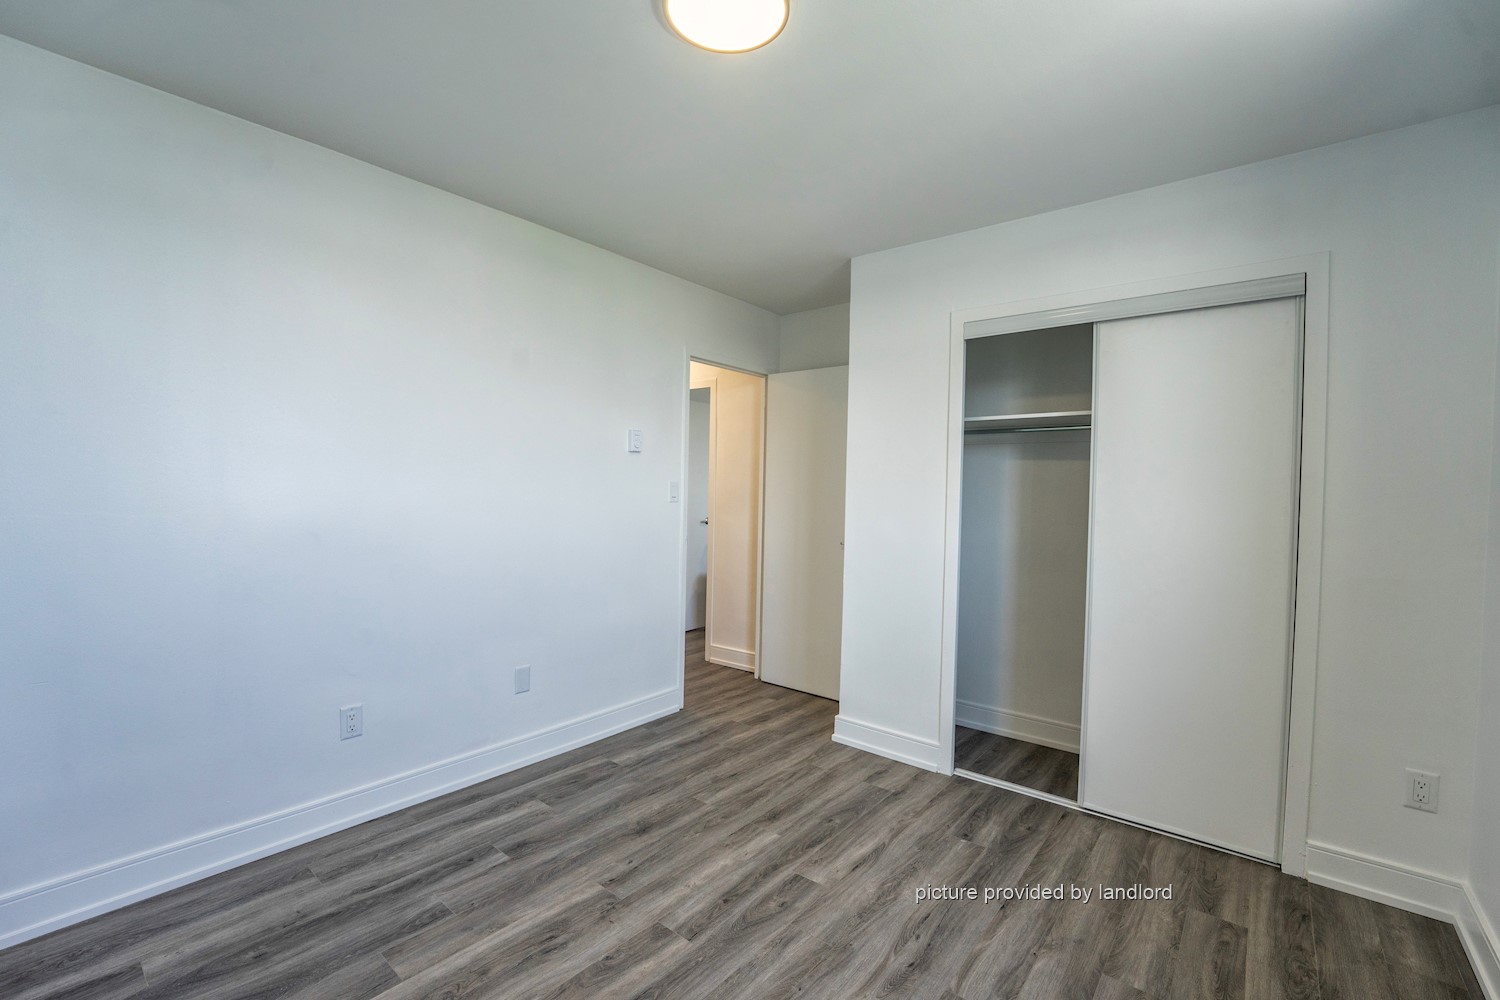 For rent: 90 Eastdale Ave East York, 2 bdrm Viewit |6311